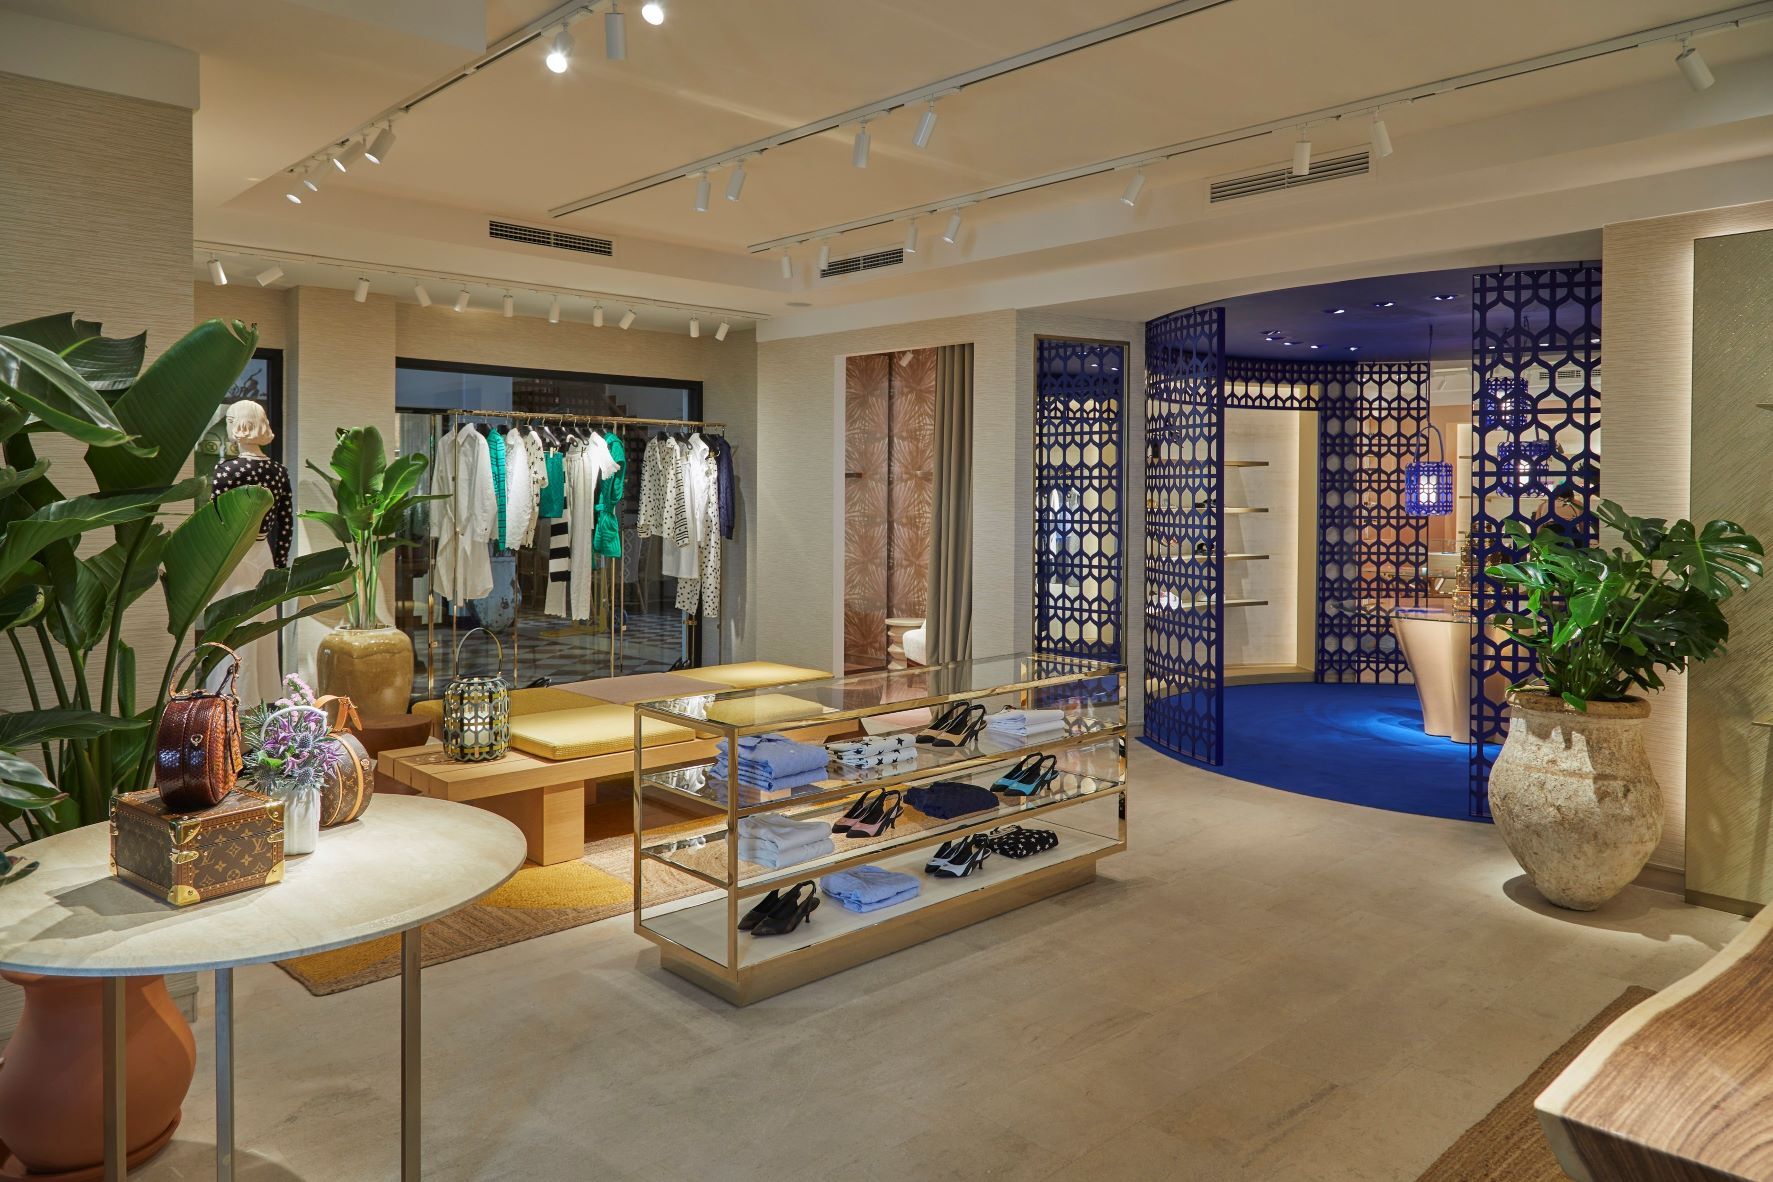 Louis Vuitton lands in Marbella with summer pop-up store